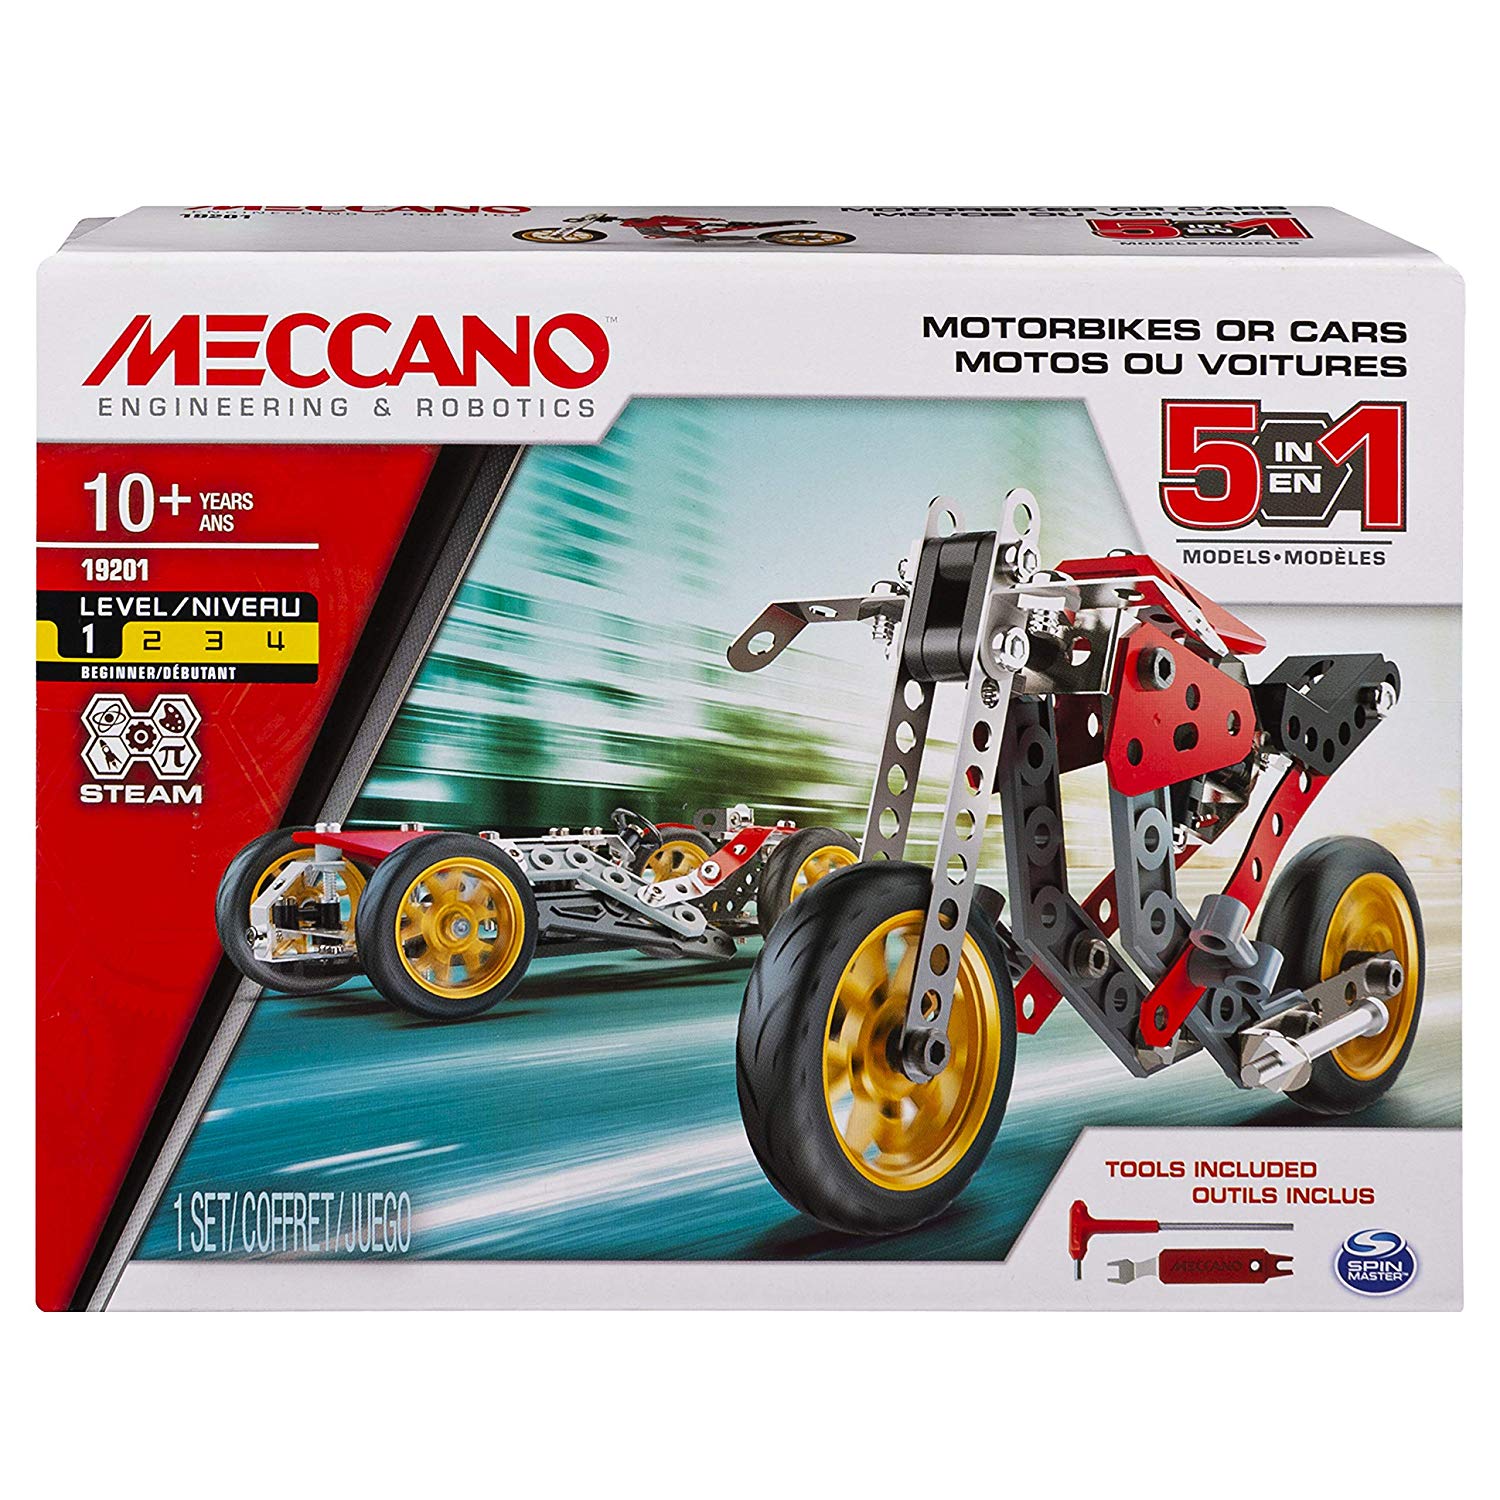 meccano for 8 year olds